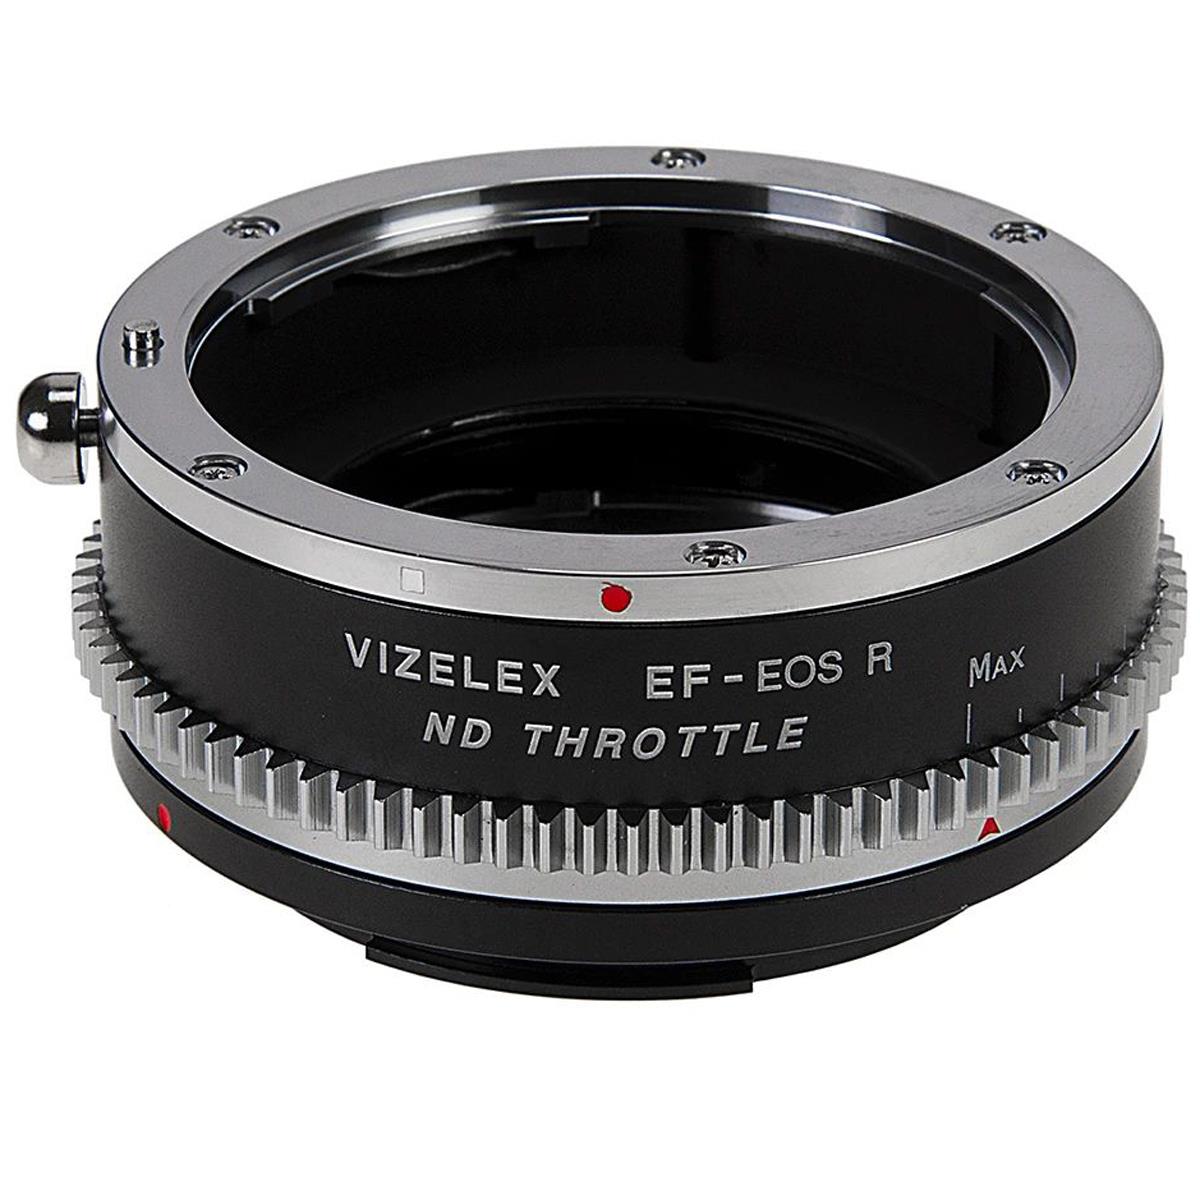 Image of Fotodiox Vizelex ND Throttle Lens Adapter for Canon EOS EF Lens - Canon RF Mount